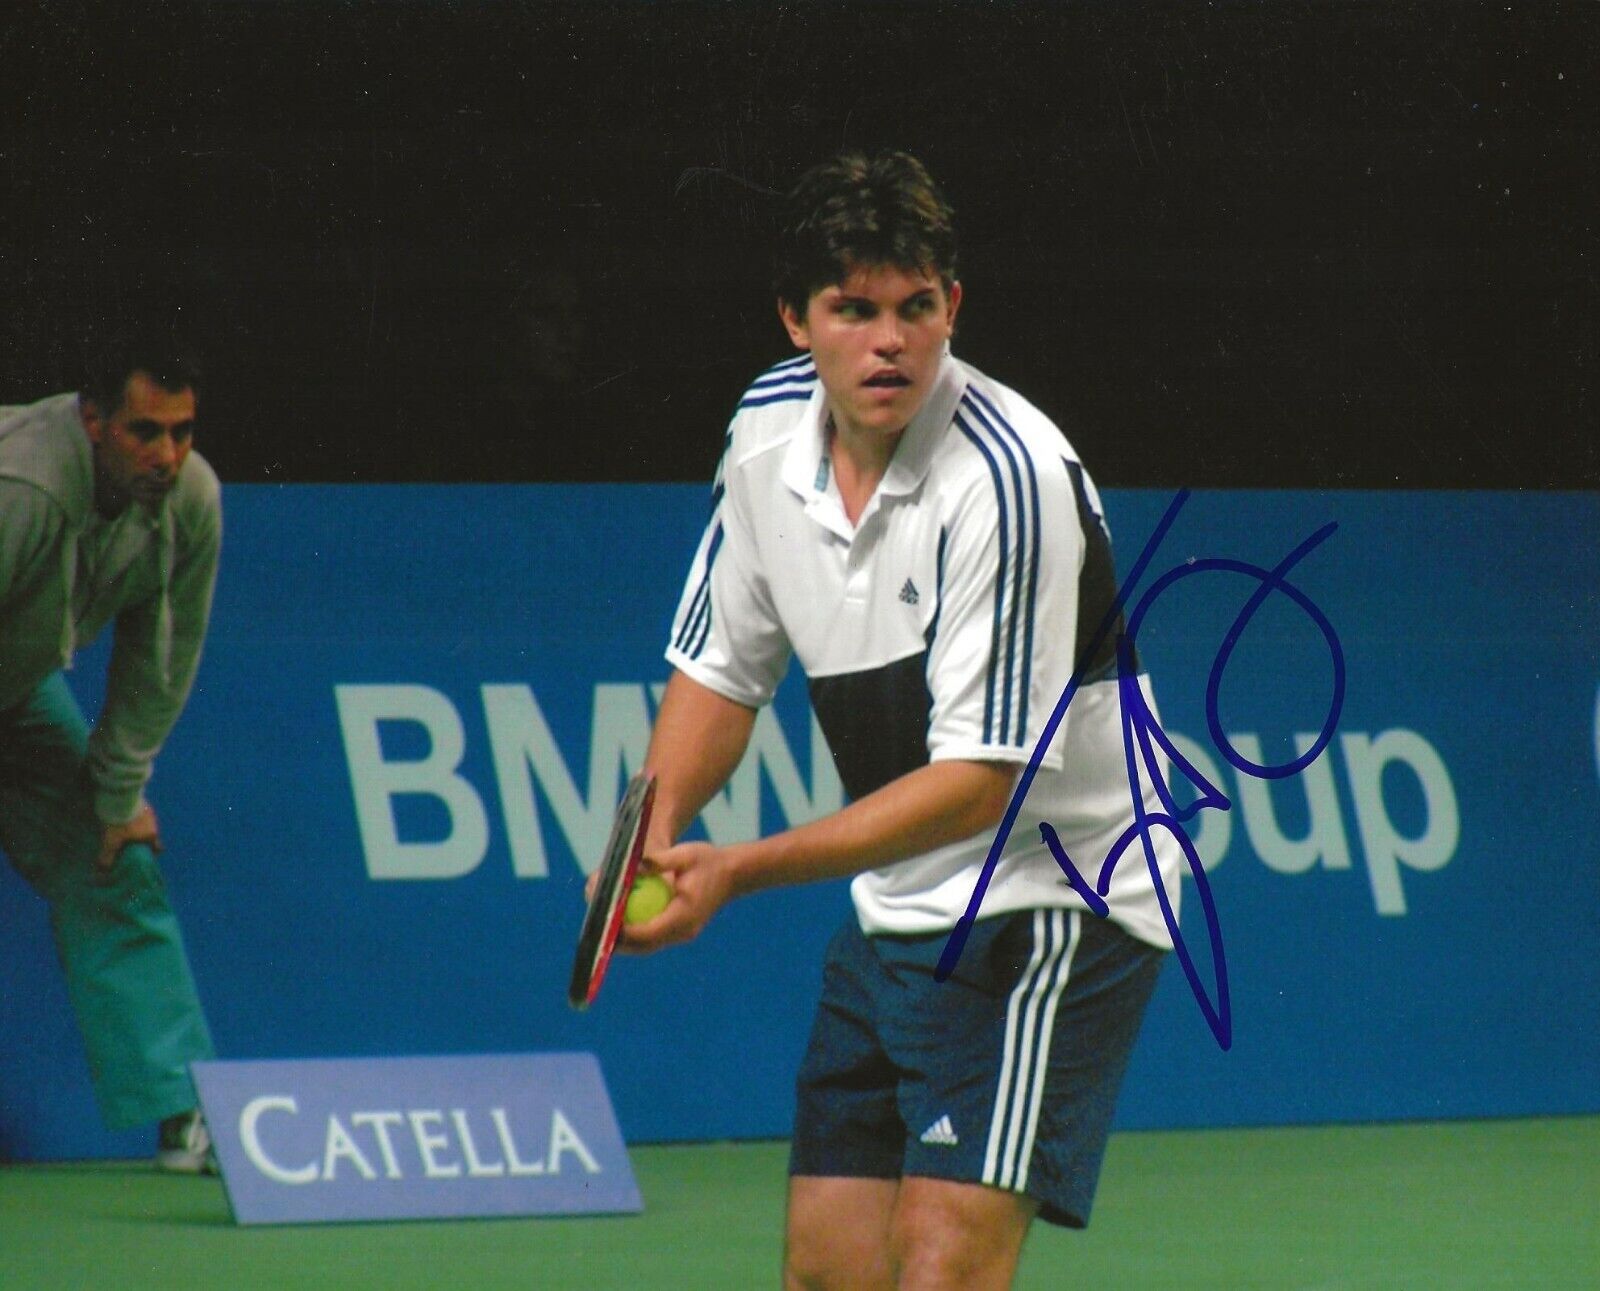 Taylor Dent signed Tennis 8x10 Photo Poster painting autographed